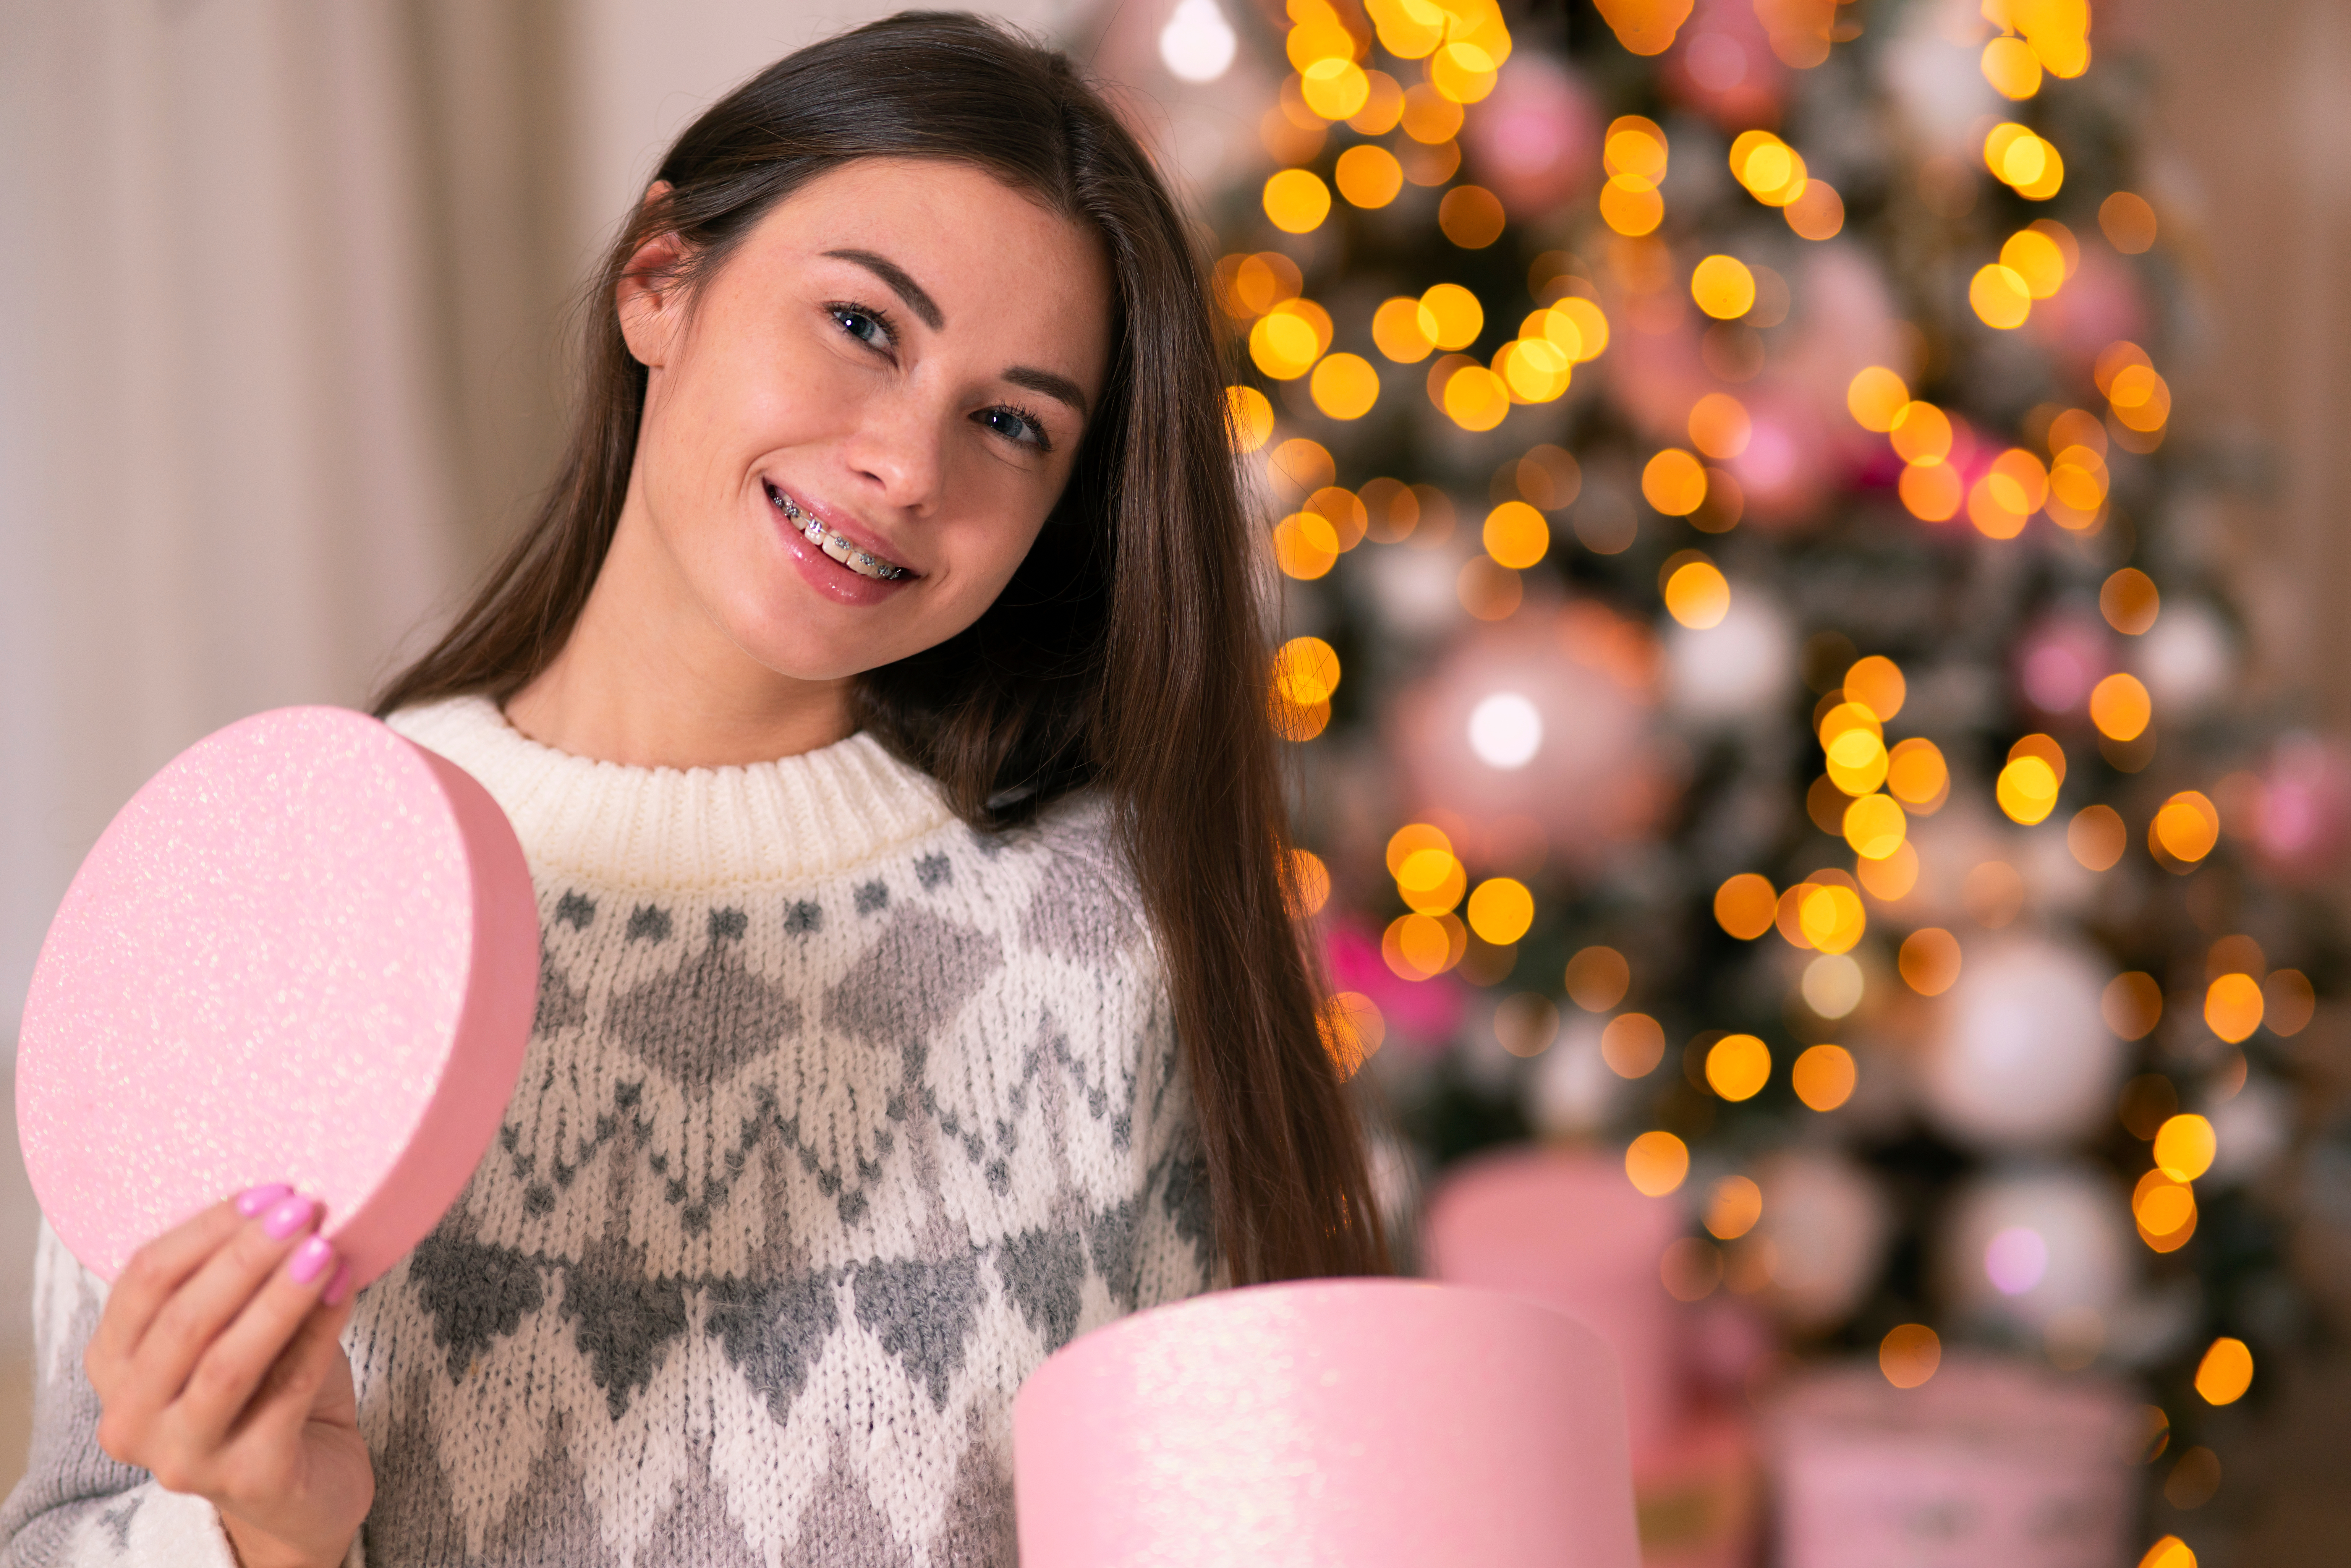 Use your holiday Orthodontic insurance benefits